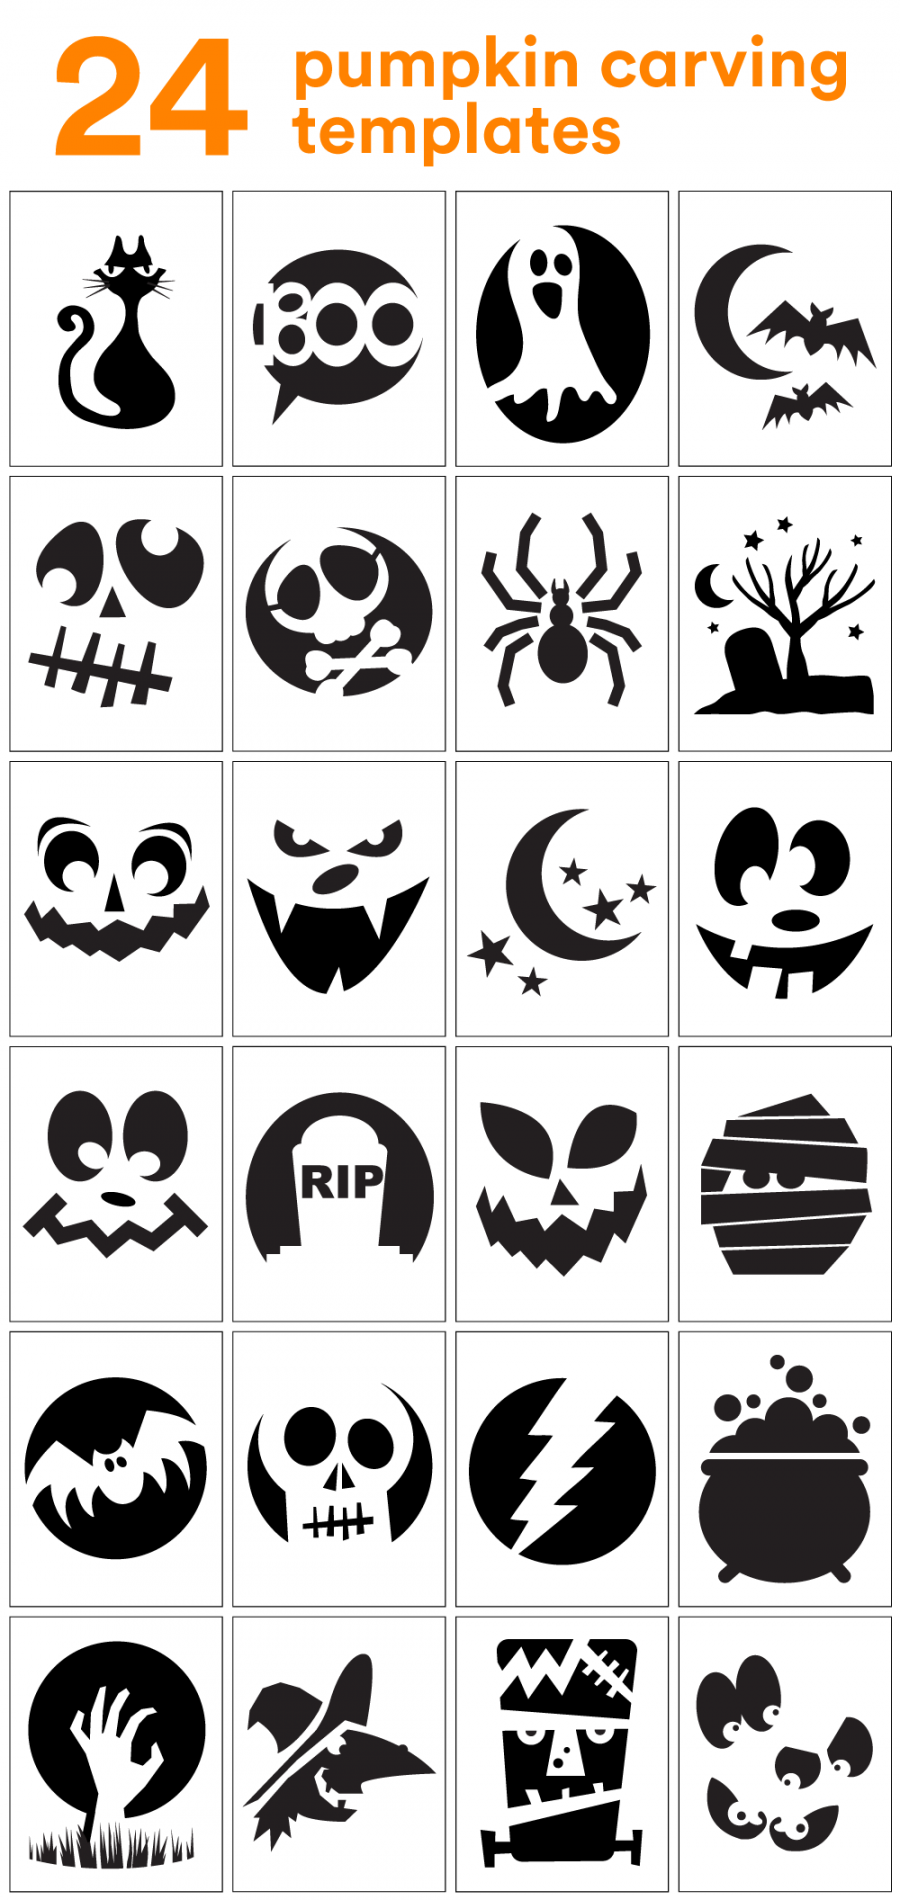 Free Printable Pumpkin Carving Stencils - Printable - How to Carve the Coolest Pumpkin on the Block (Carving Stencils